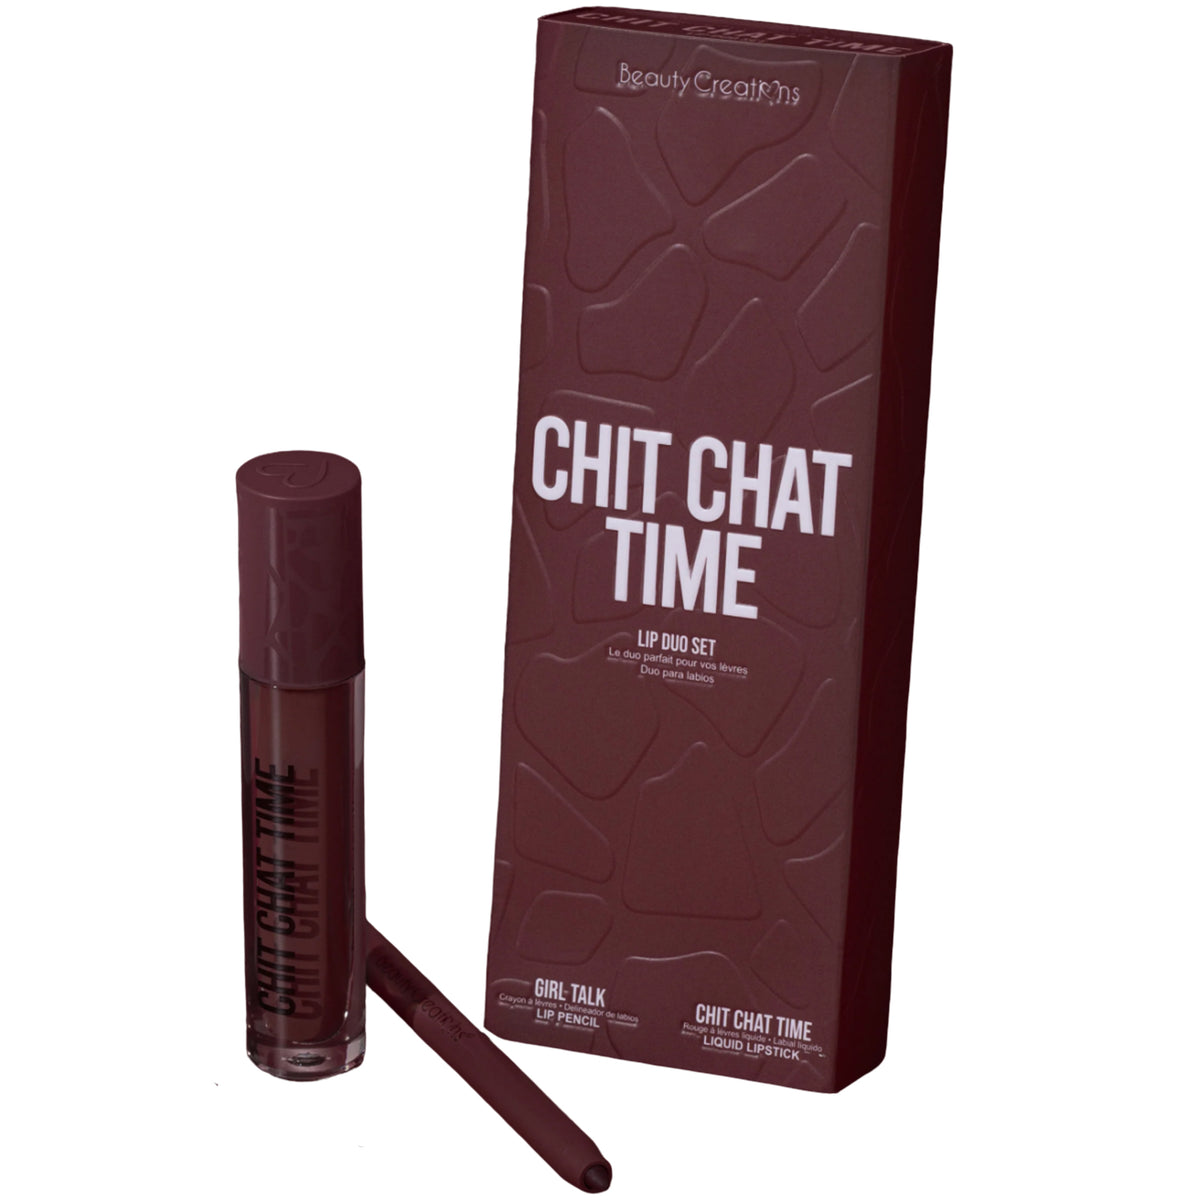 CHIT CHAT TIME LIP DUO BEAUTY CREATIONS